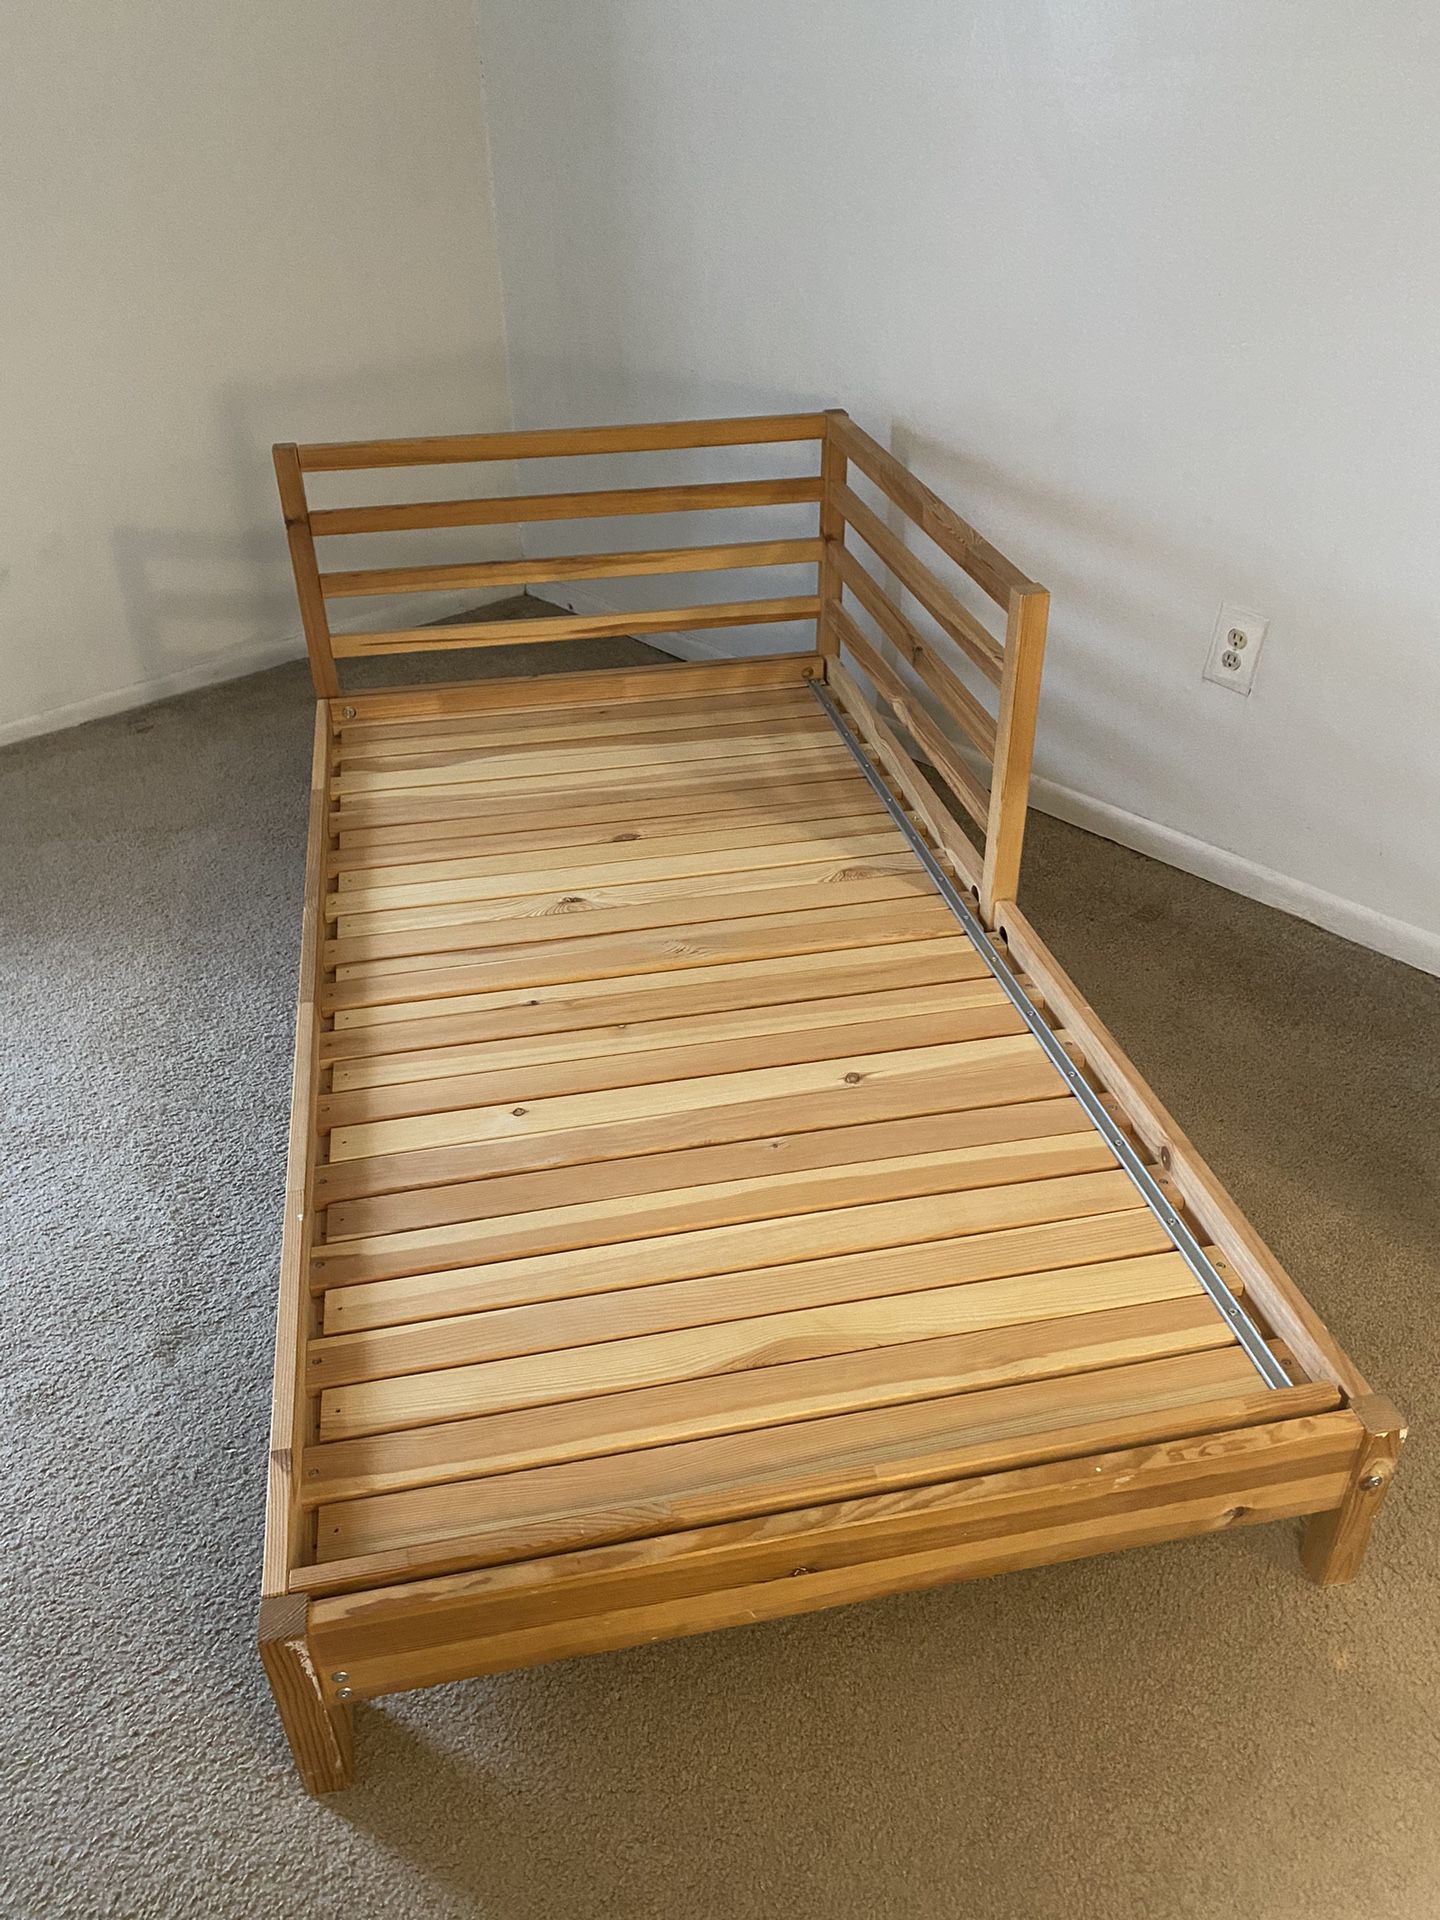 Adjustable Twin To Full Bed Frame/ Day Bed